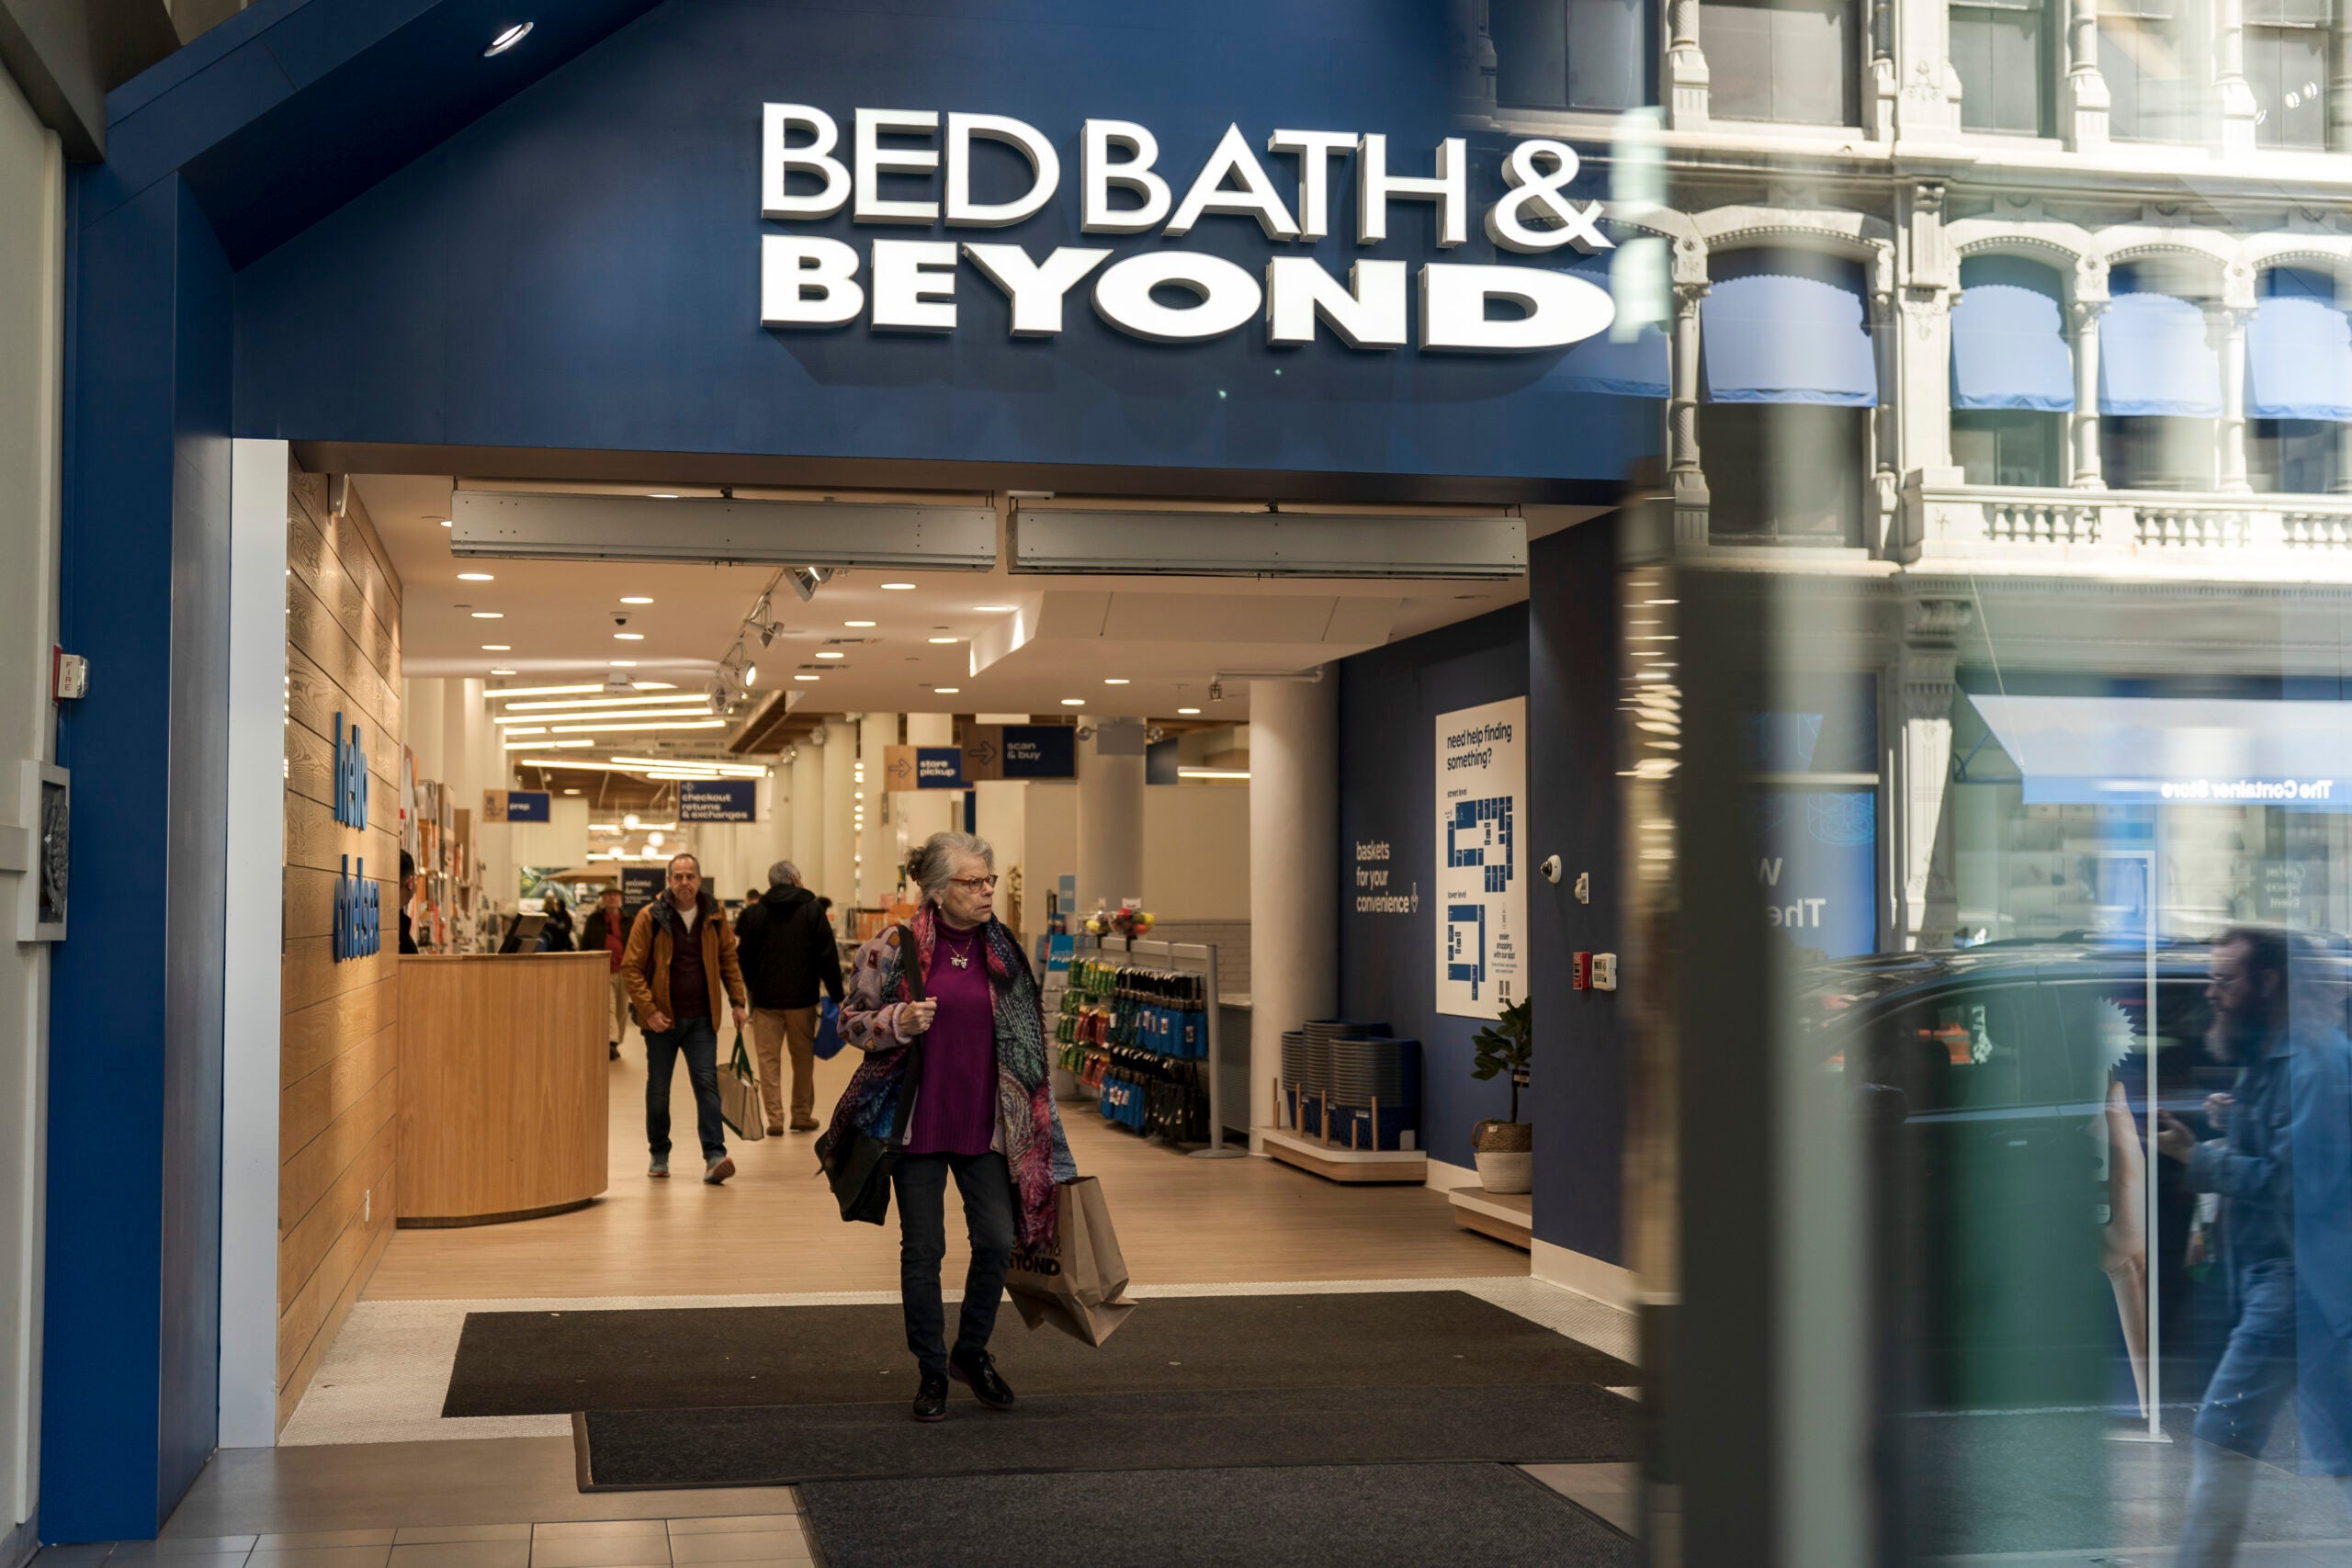 Shoppers at a Bed Bath & Beyond store in the Chelsea neighborhood of New York.